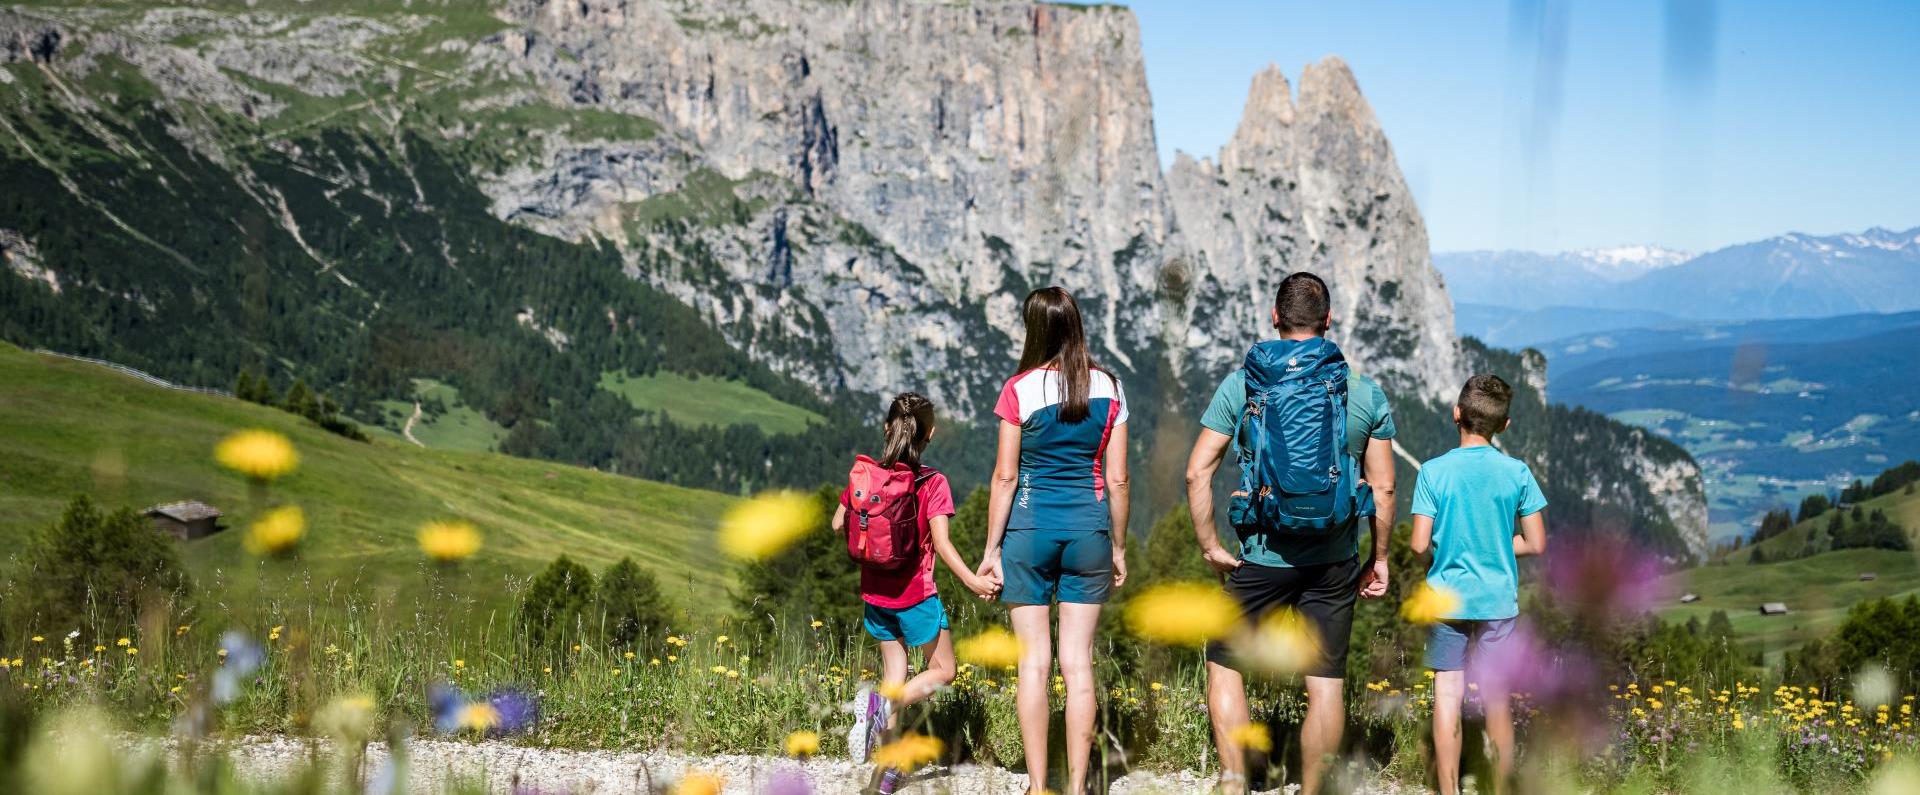 Adventure hiking and exploring with children on the Seiser Alm